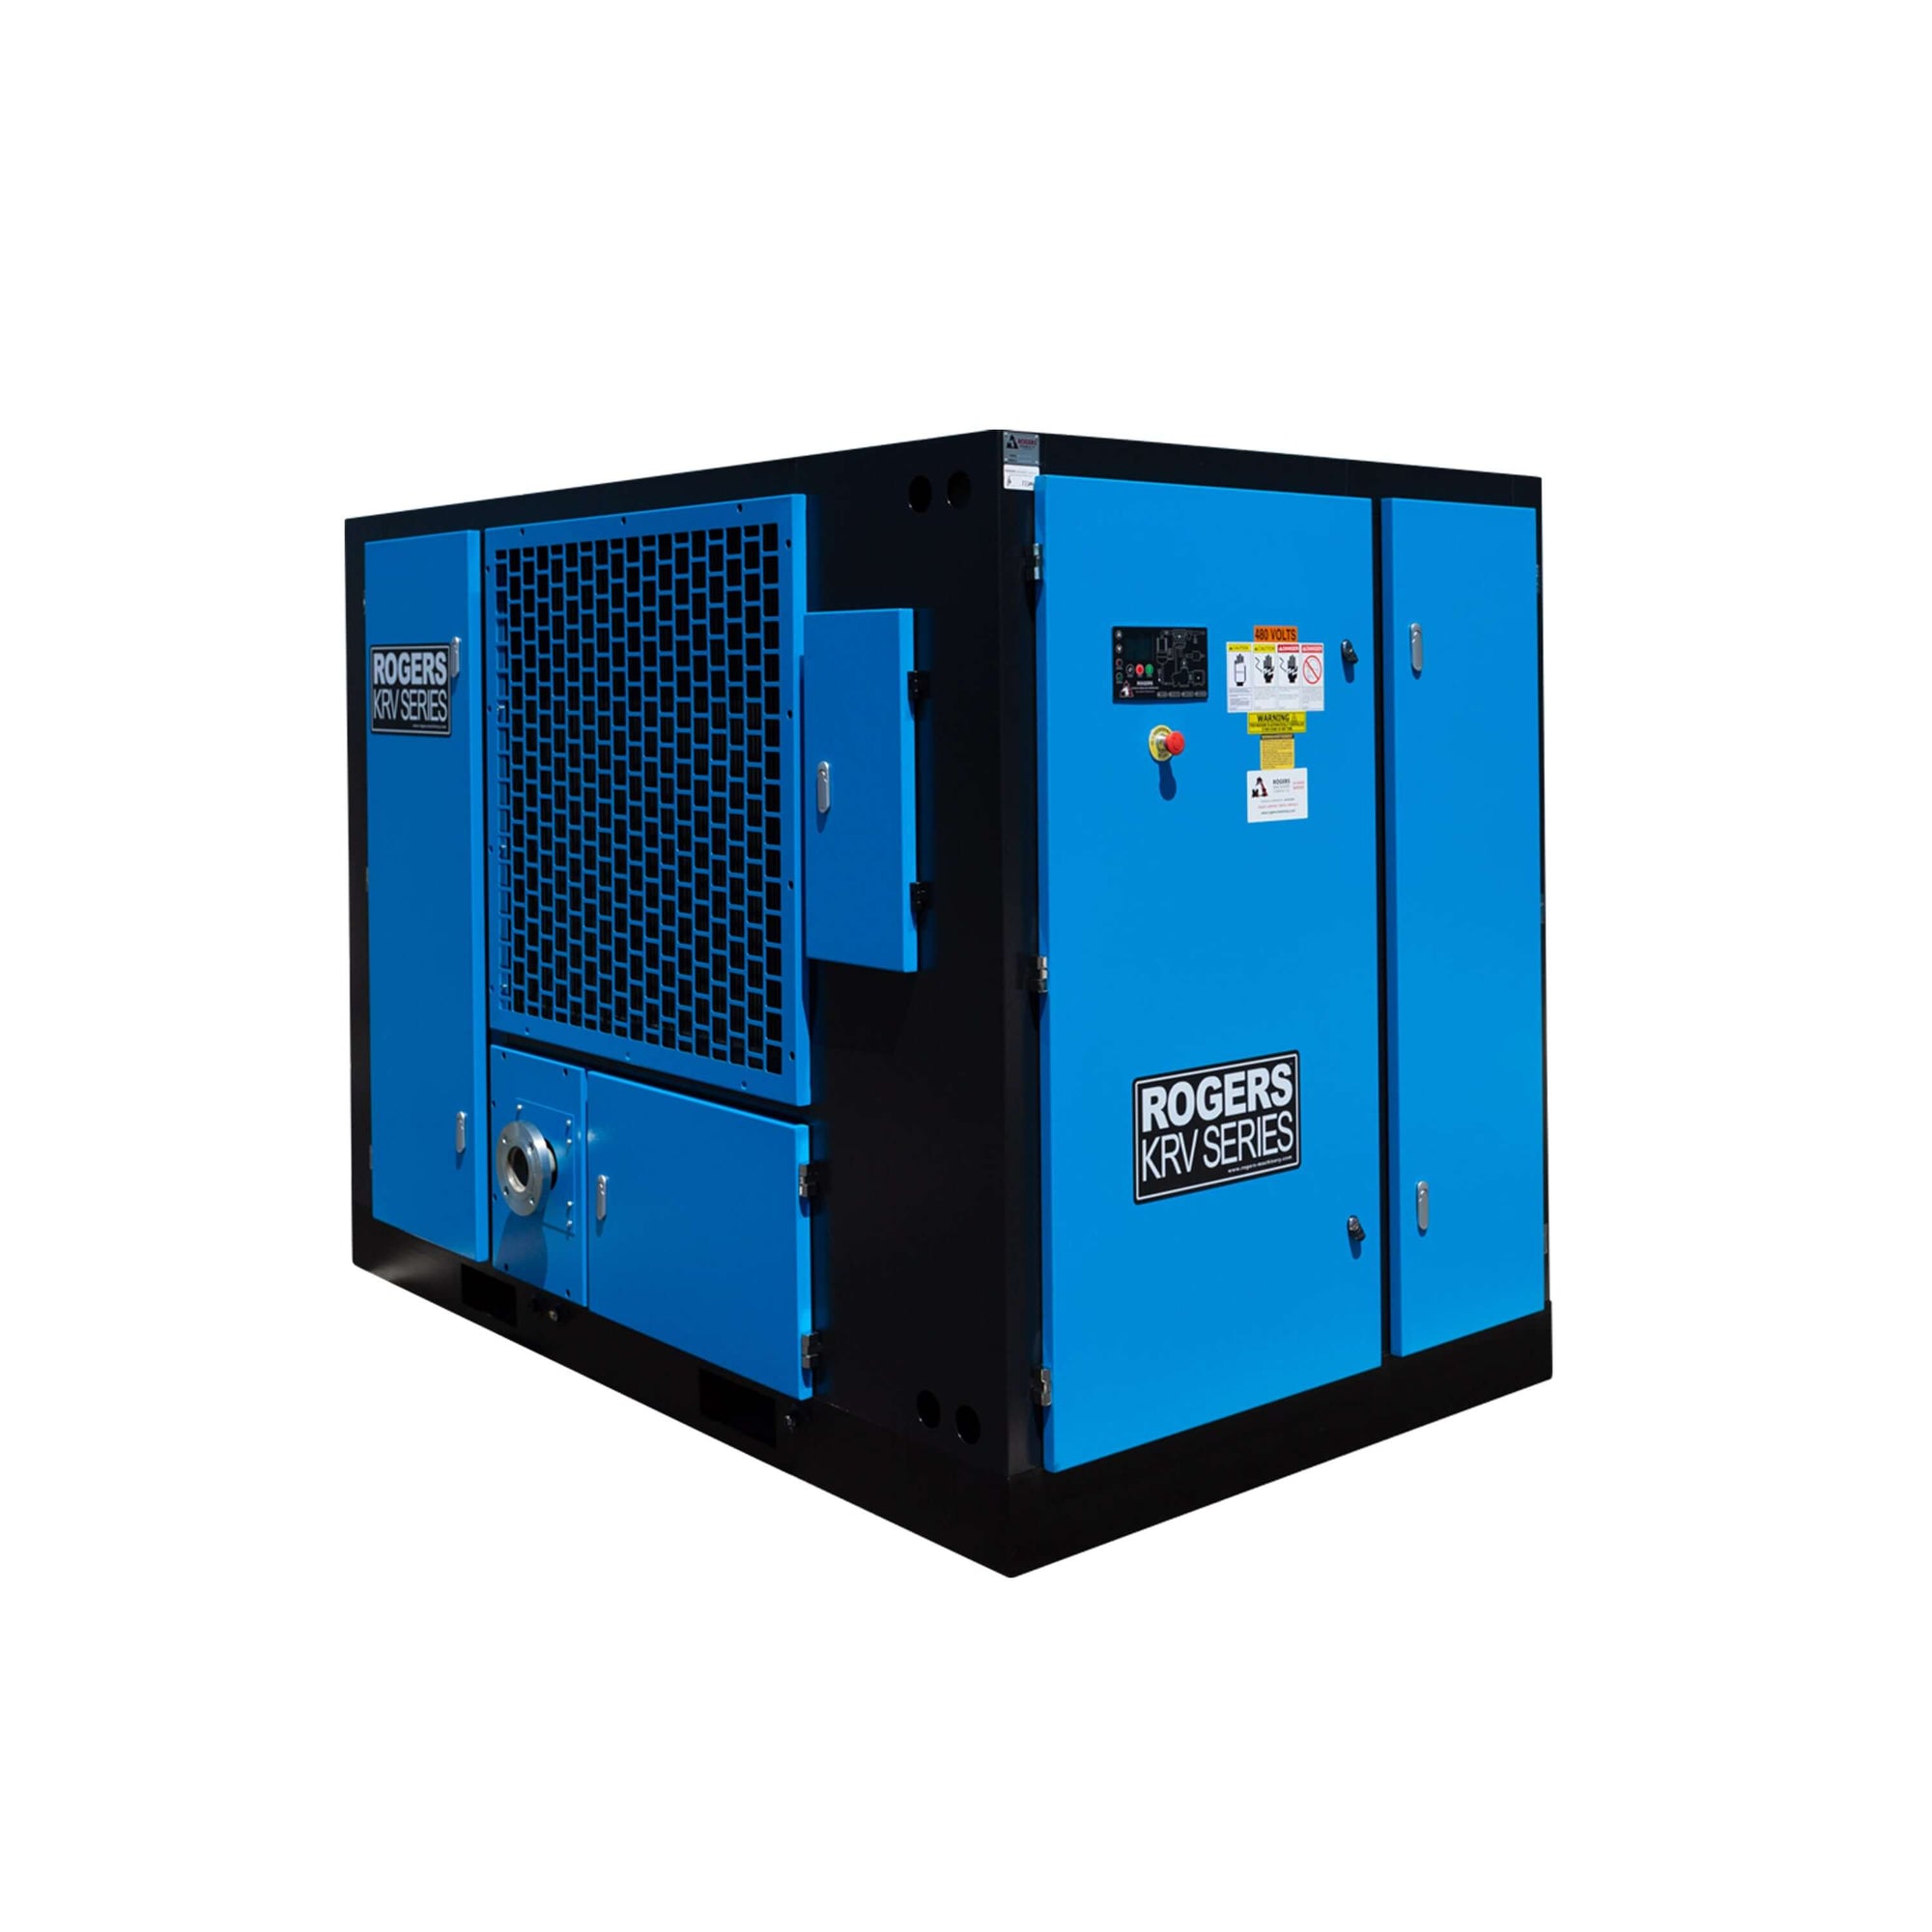 Rogers Rotary Screw Air Compressor - KR/KRV Series KR/KRV-Series 0-24HP, 0-99PSIG, 100-124PSIG, 100-199HP, 100-199SCFM, 1100+SCFM, 125-149PSIG, 150-199PSIG, 20-49SCFM, 200-299PSIG, 200-499HP, 200-499SCFM, 25-49HP, 50-99HP, 50-99SCFM, 500-799SCFM, 800-1099SCFM, a/c, fixed, ind_aerospace, ind_automotive, ind_glass&plastics, ind_manufacturing, ind_mining, ind_municipalities, ind_package, ind_water-treatment, ind_wood-products, k-series, lubricated, rogers-machinery, rotary-screw, show_manufacture_icon, vfd, w/